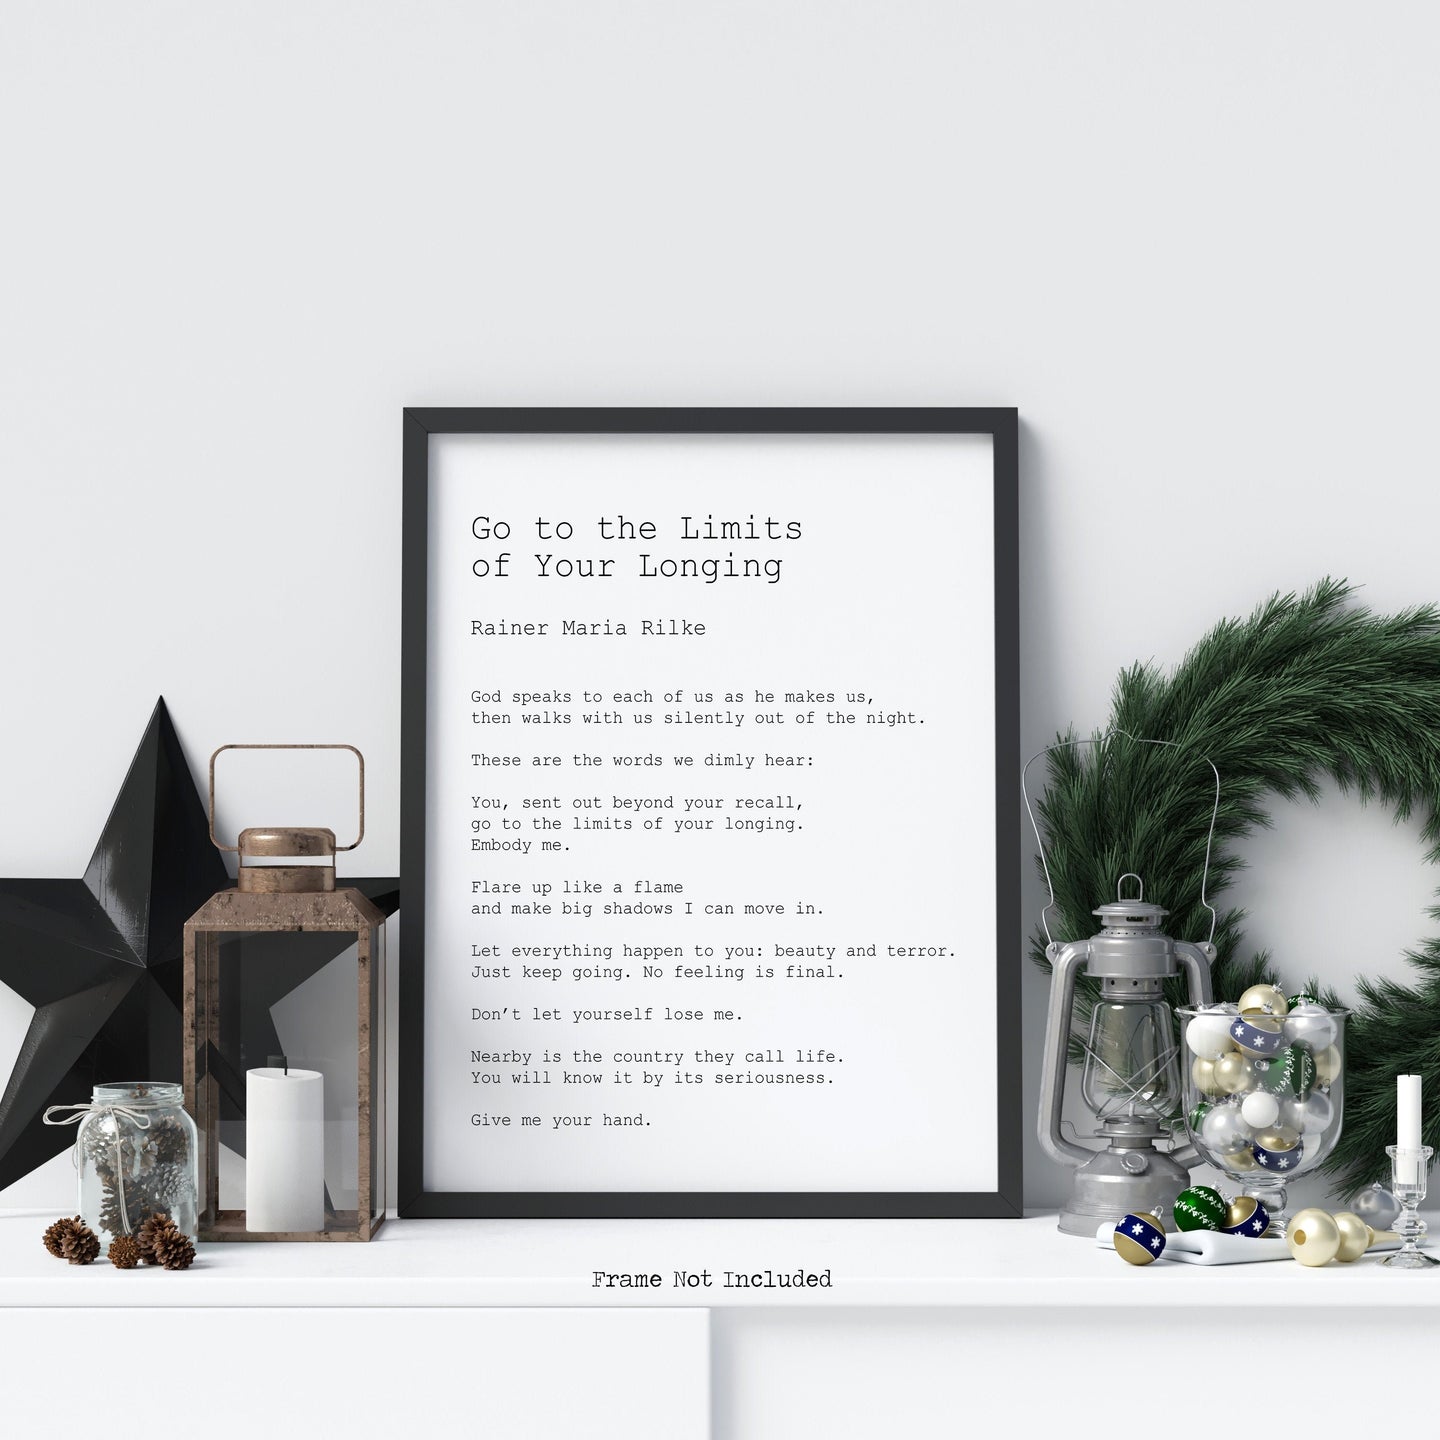 Rainer Maria Rilke - Go to the limits of your longing - Let everything happen to you... No feeling is final Poem Art Print - UNFRAMED